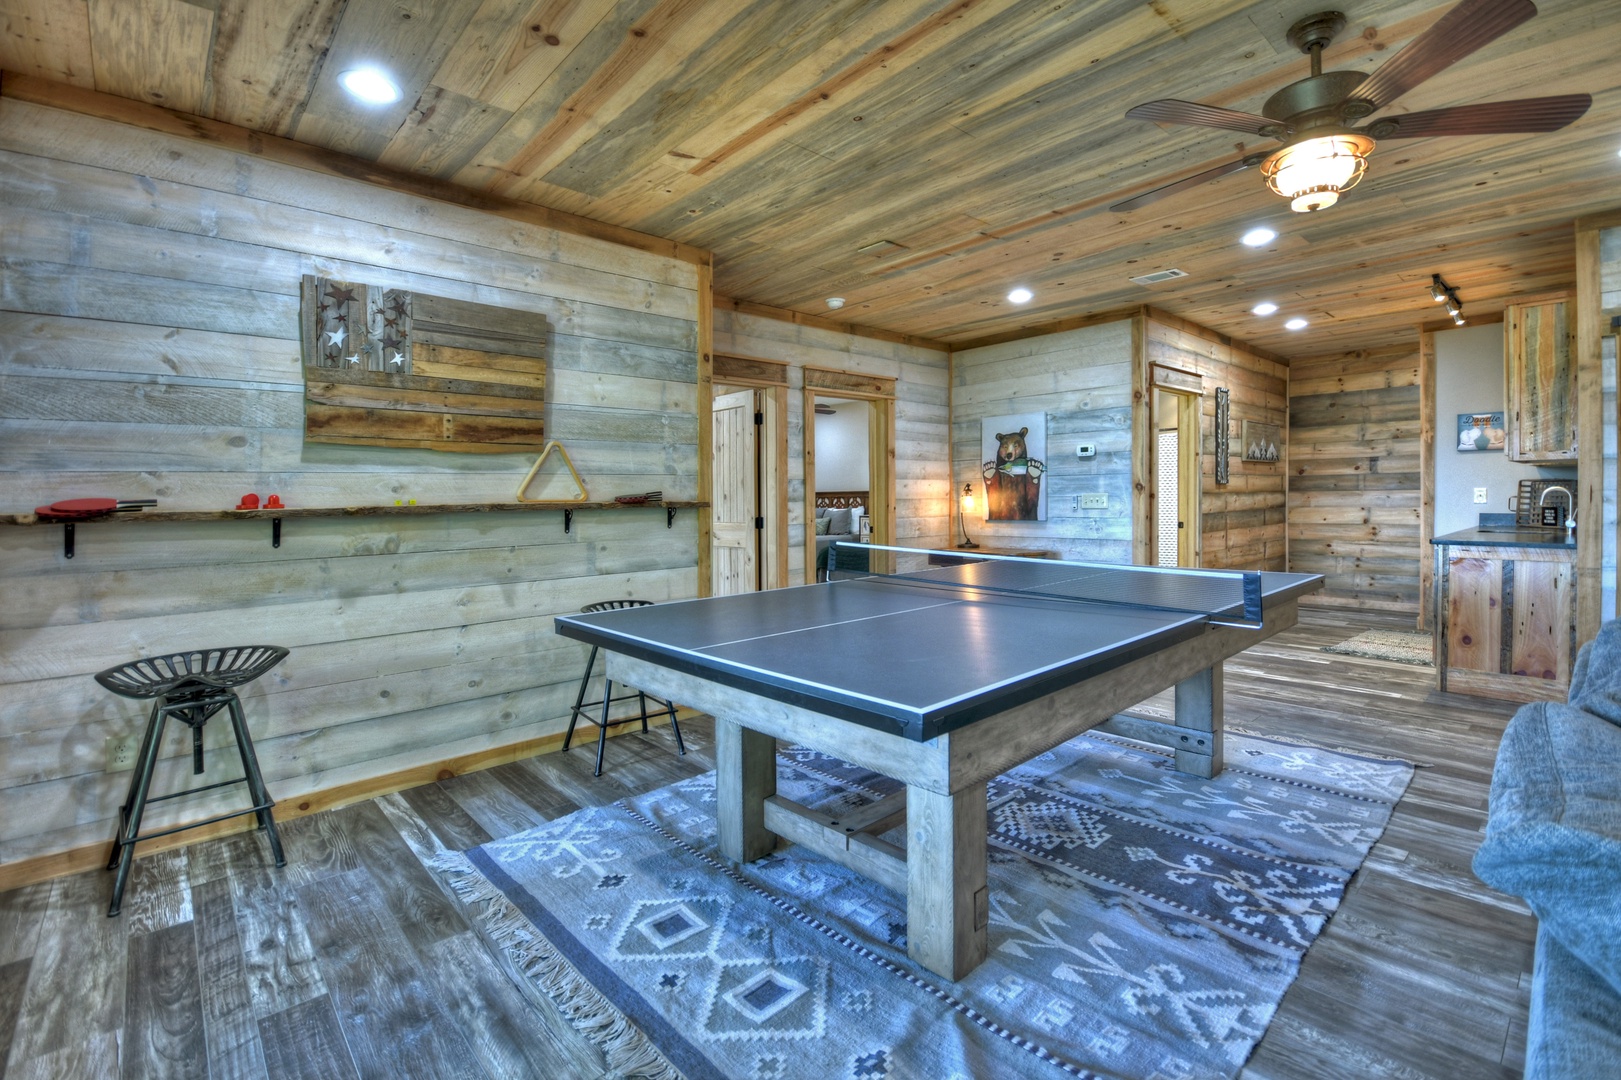 Once In A Blue Ridge: Lower-level Game Room